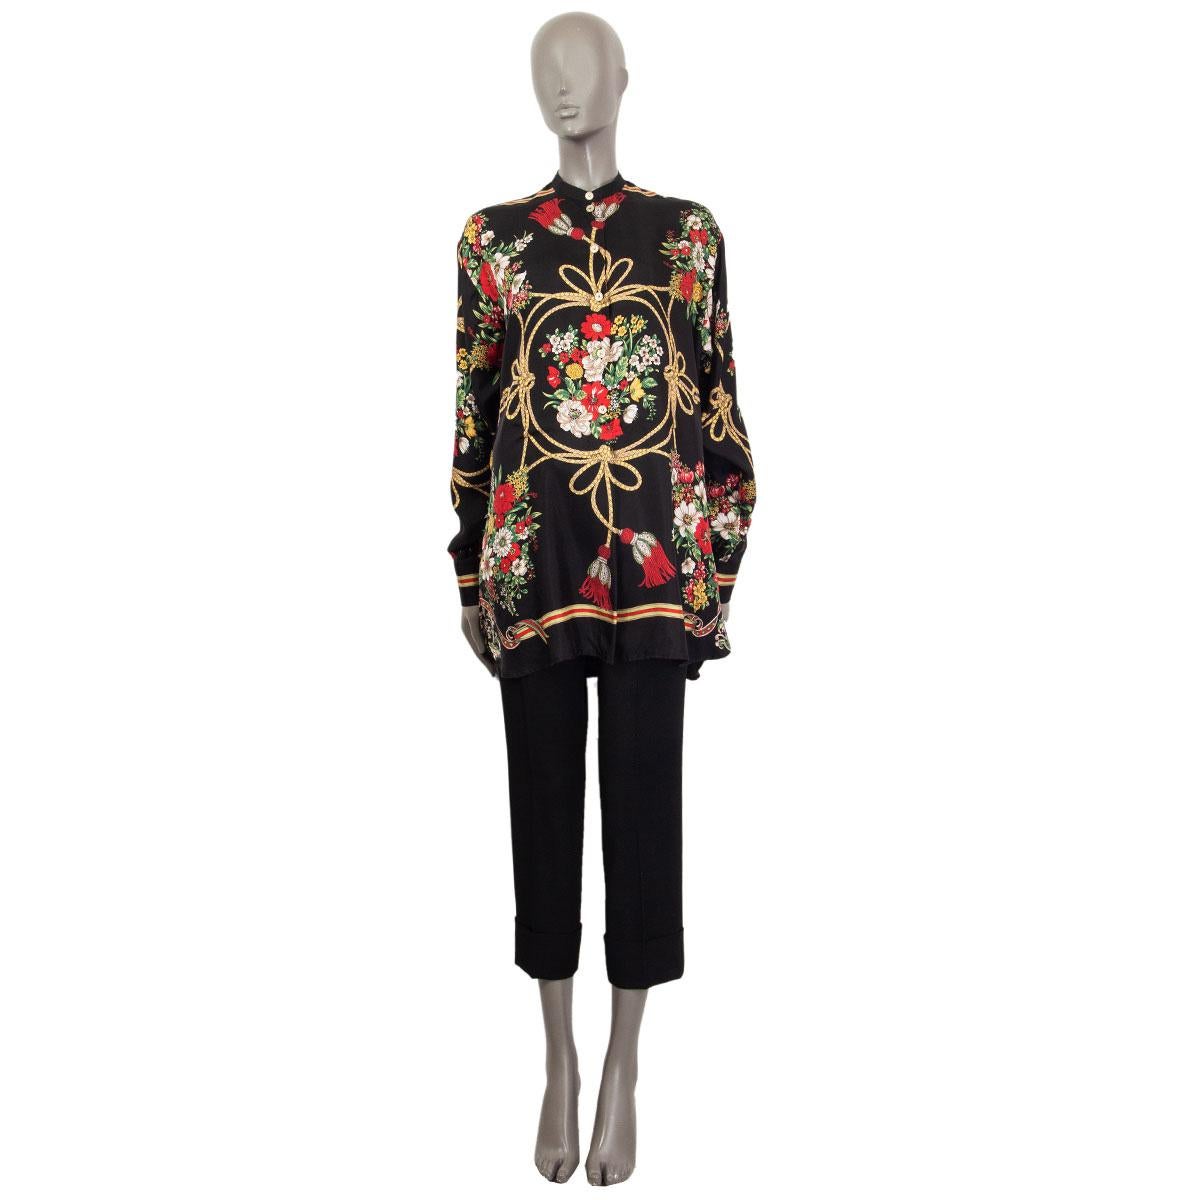 100% authentic Gucci oversized floral and tassel print shirt in black, red, white, beige, green and yellow silk twill (100%) in reminiscent of vintage silk scarfs. Opens with a half-button line at front. Has been worn and is in excellent condition.